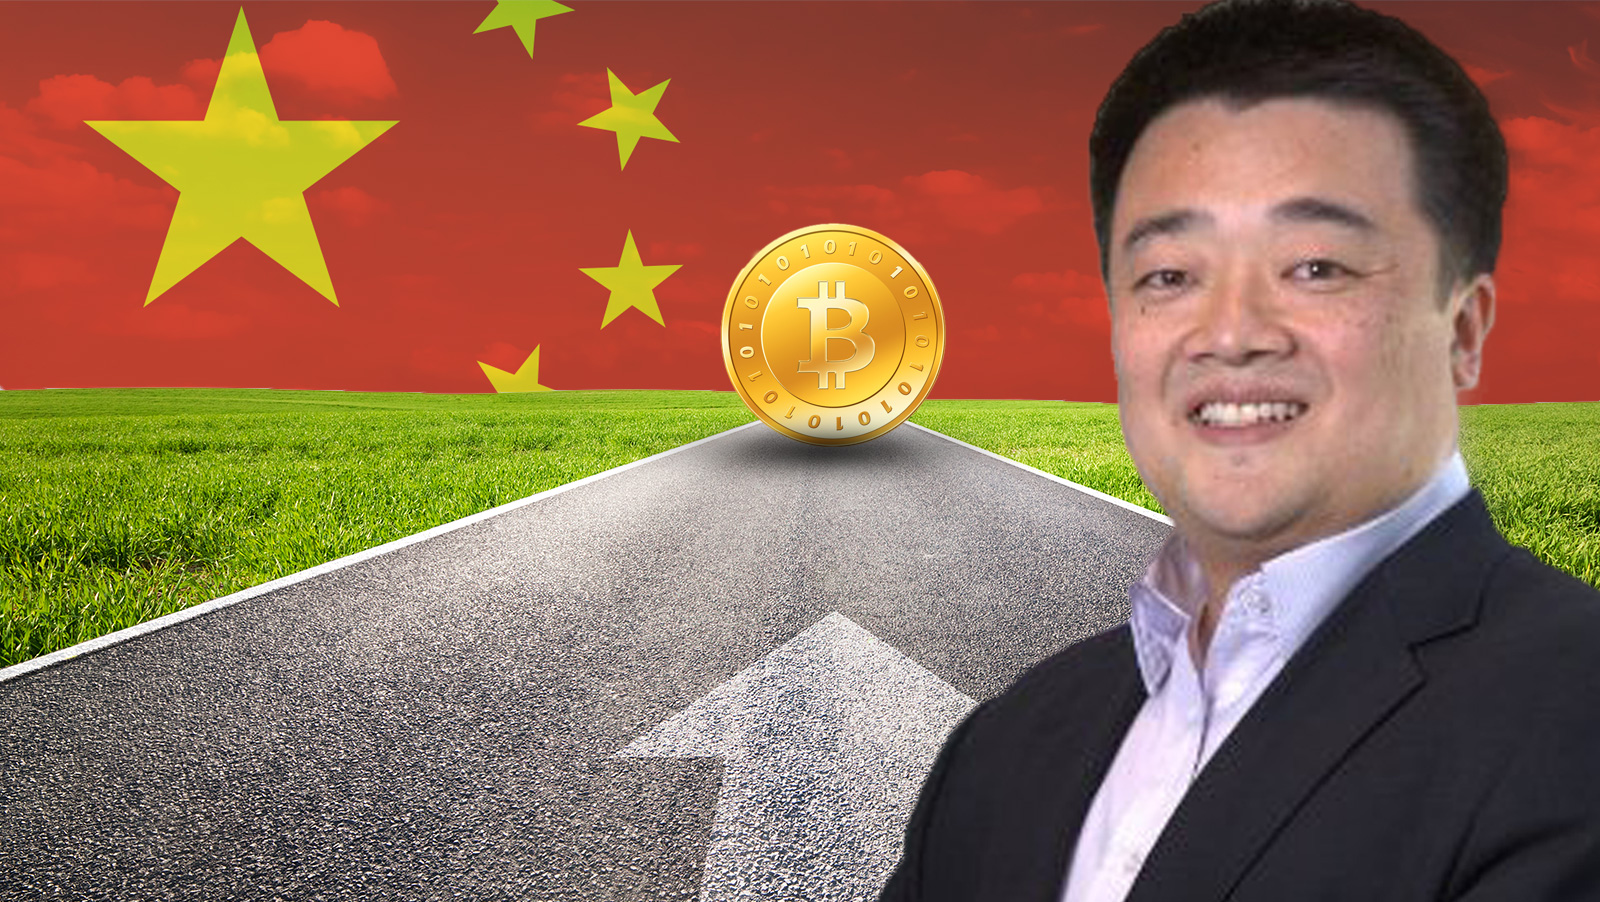 Bitcoin braces for possible long wait to be regulated in China